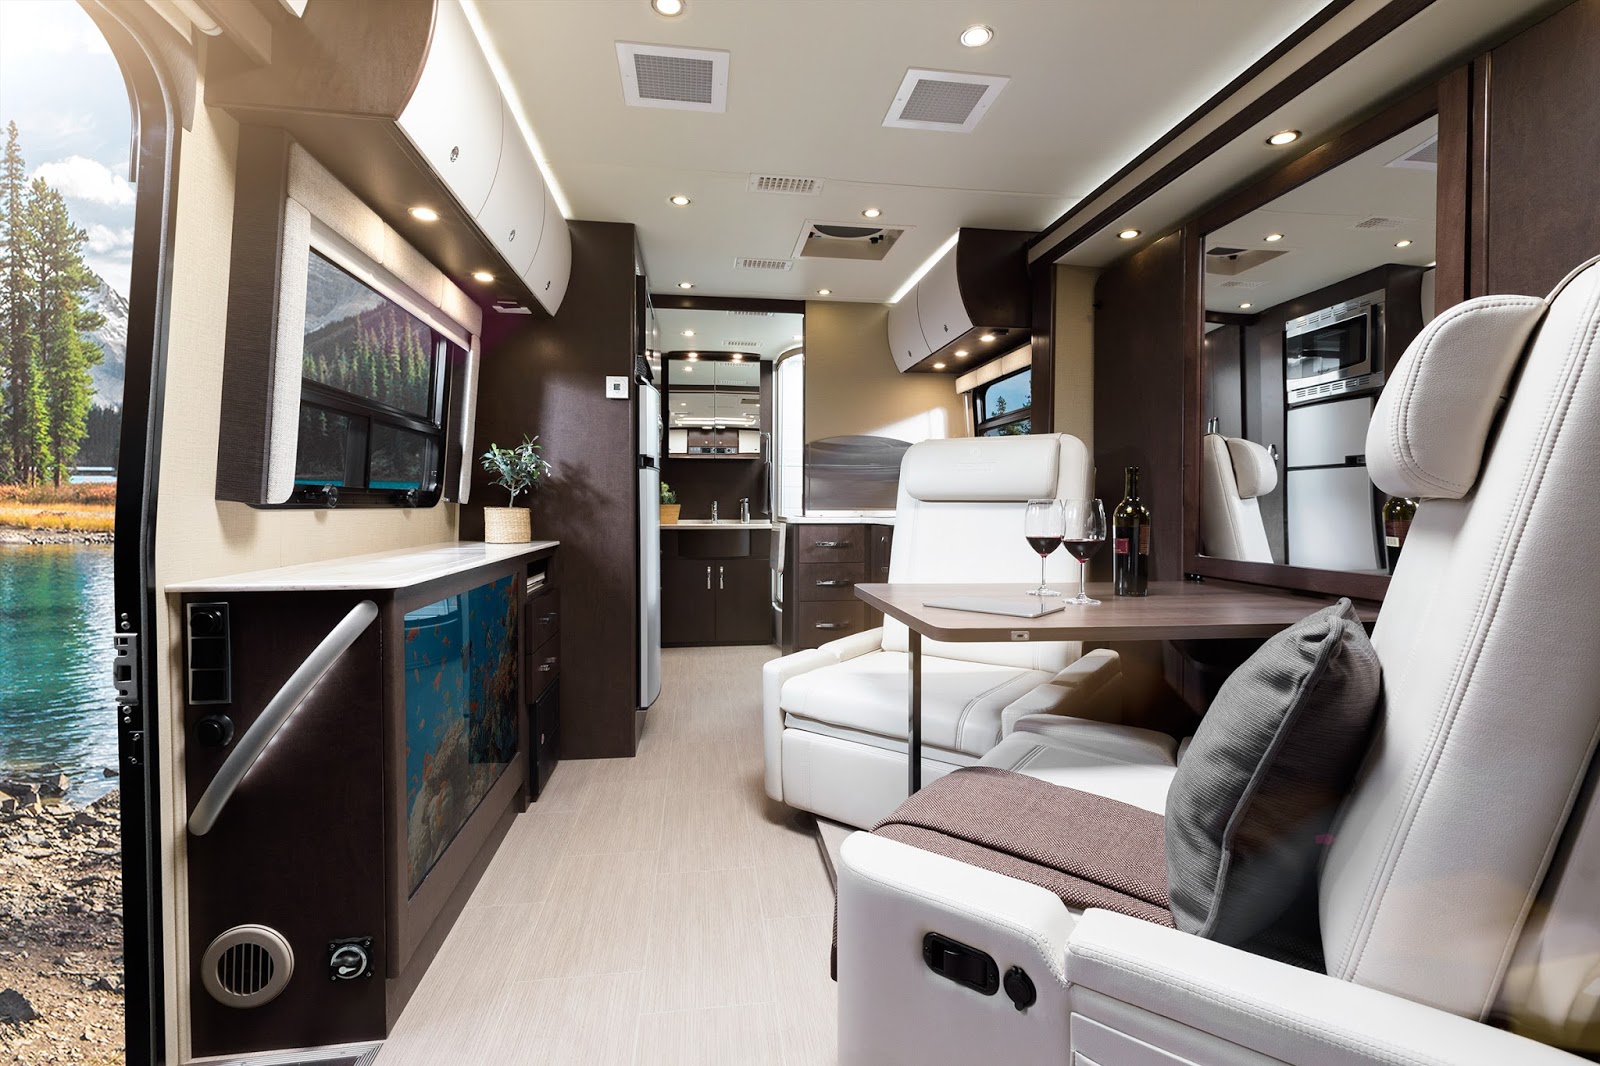 The All-New Leisure Lounge Plus - RV Trader Blog